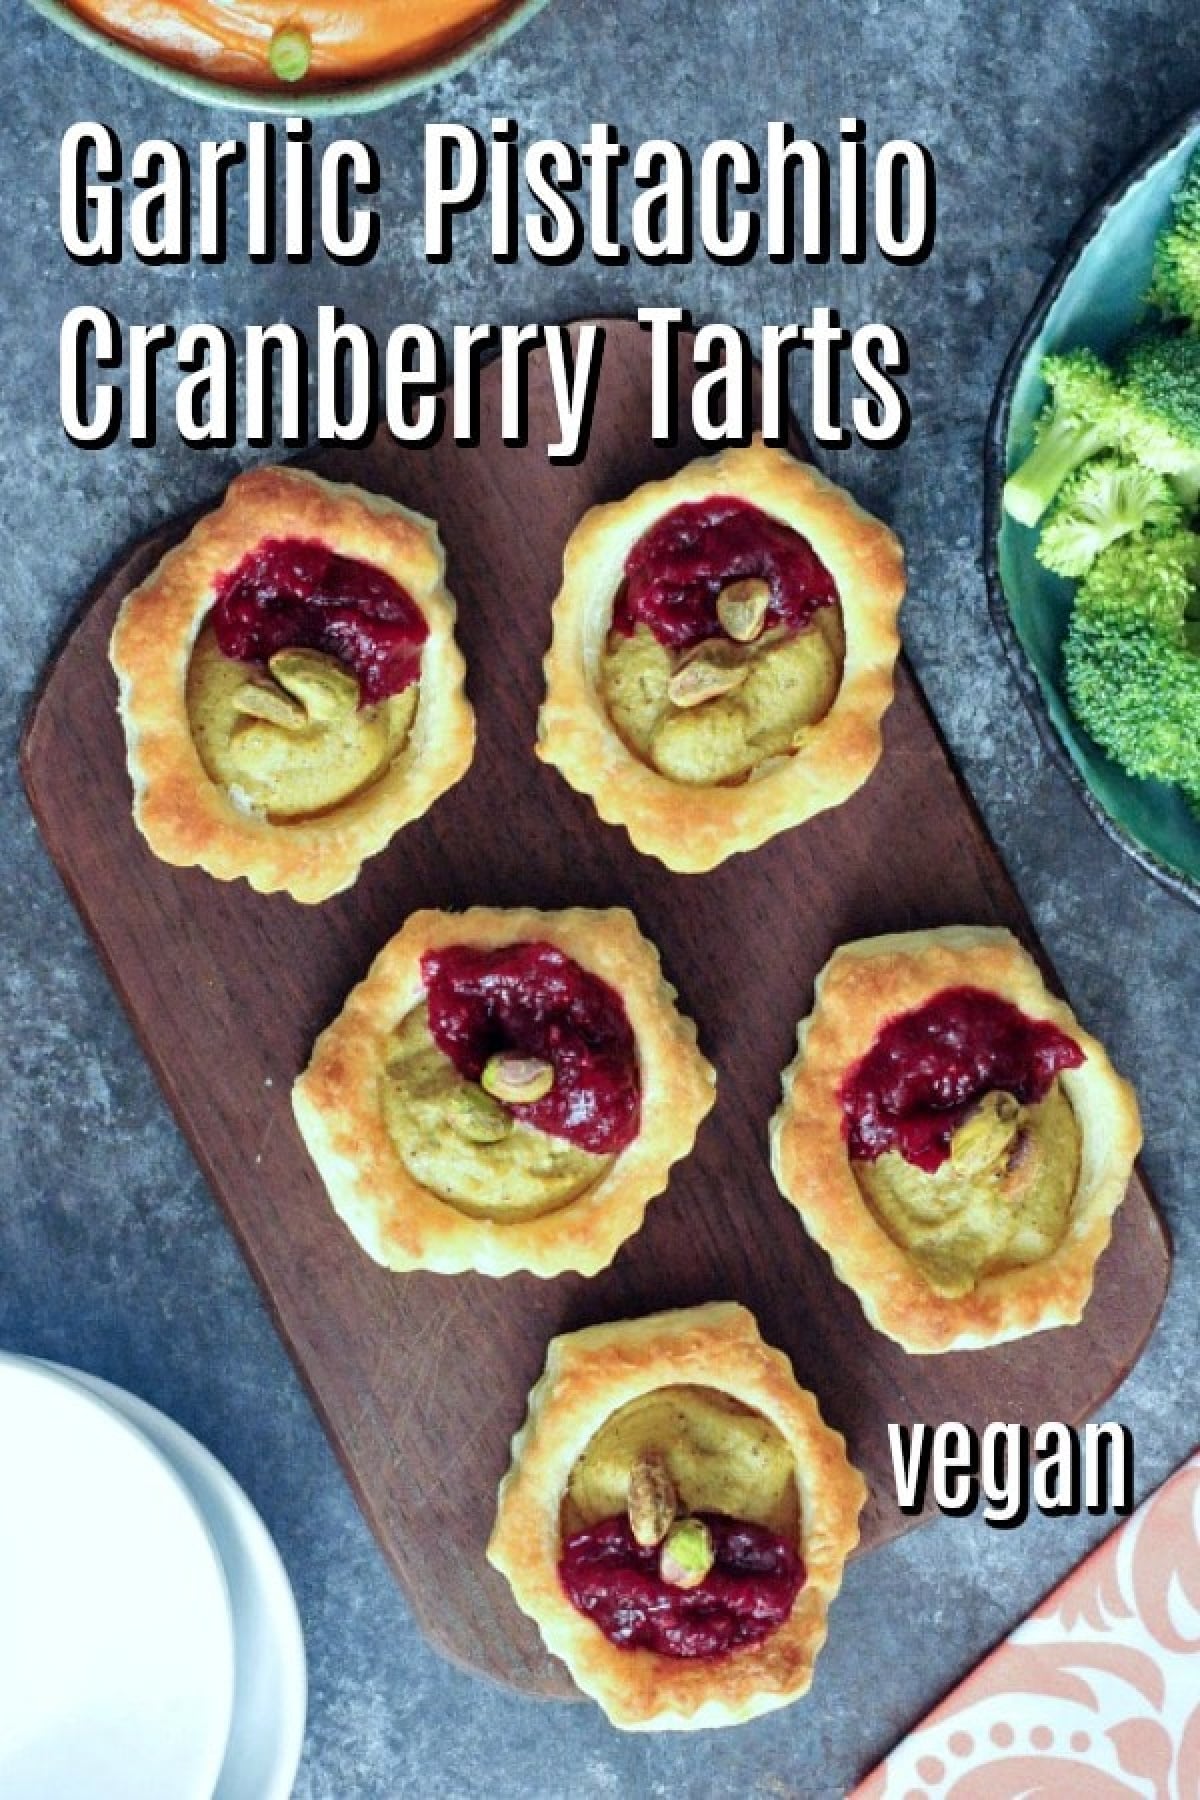 Overhead view of bright pink and green garlic pistachio cranberry tarts on a wood serving board.